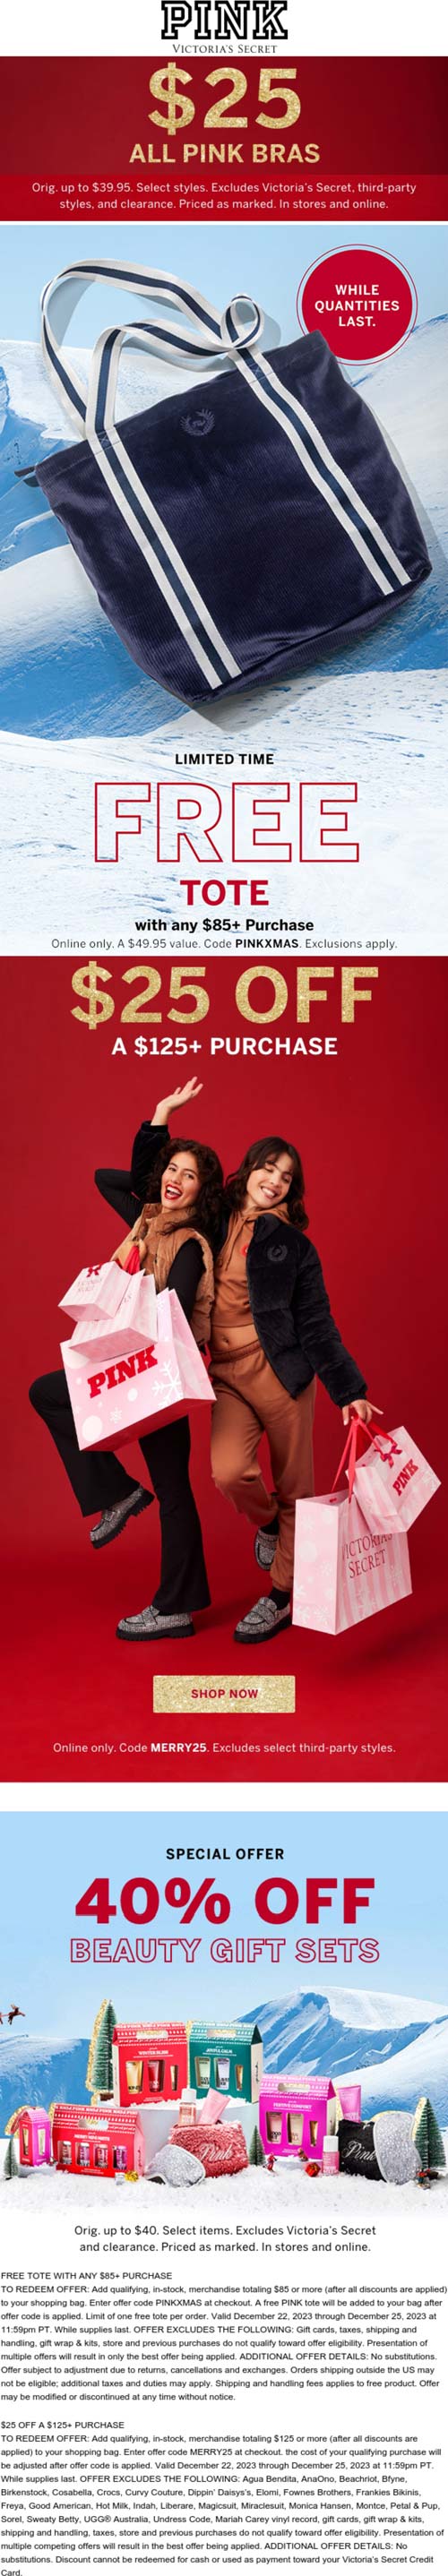 PINK stores Coupon  Free tote on $85, 40% off gift sets & $25 off $125 at PINK via promo code PINXMAS and MERRY25 #pink 